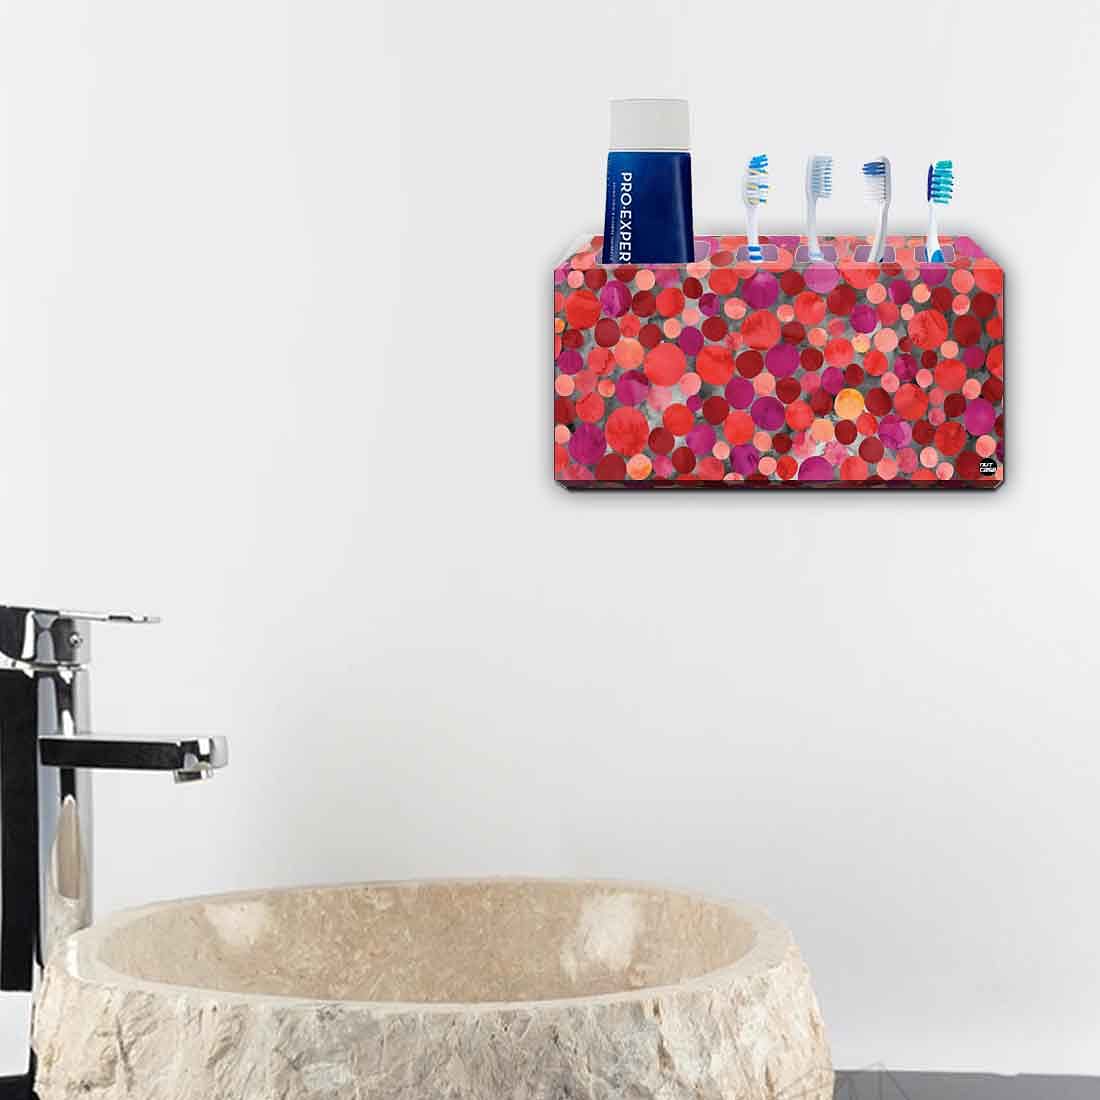 Toothbrush Holder Wall Mounted -Pink Marble Dots Nutcase